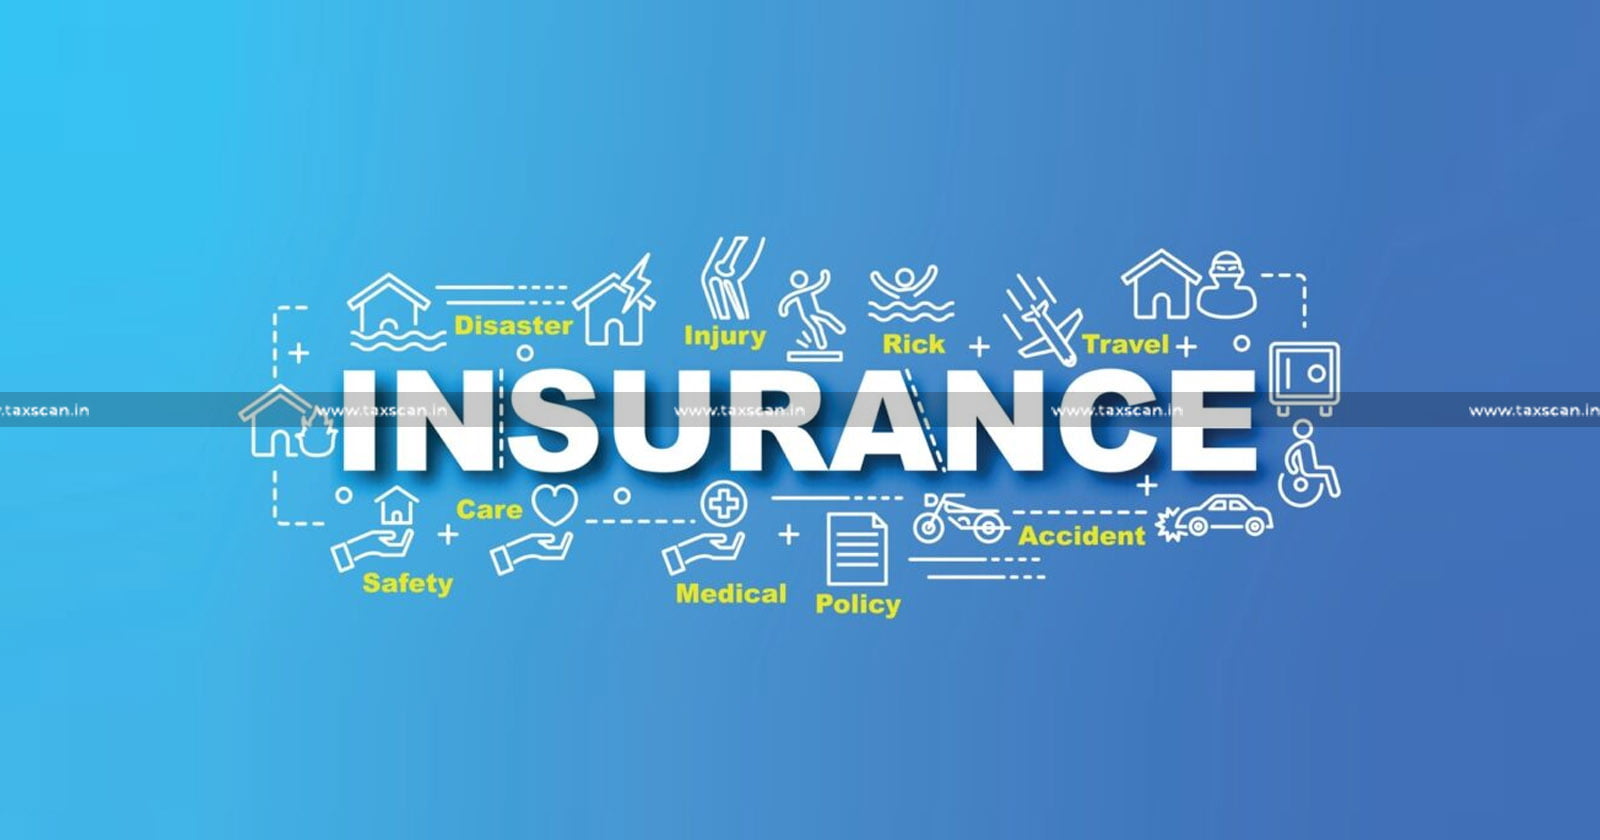 Insurance Companies - Insurance - Bogus ITC - ITC - Excess Commission - Insurers - Banks - GST notices - GST - Taxscan